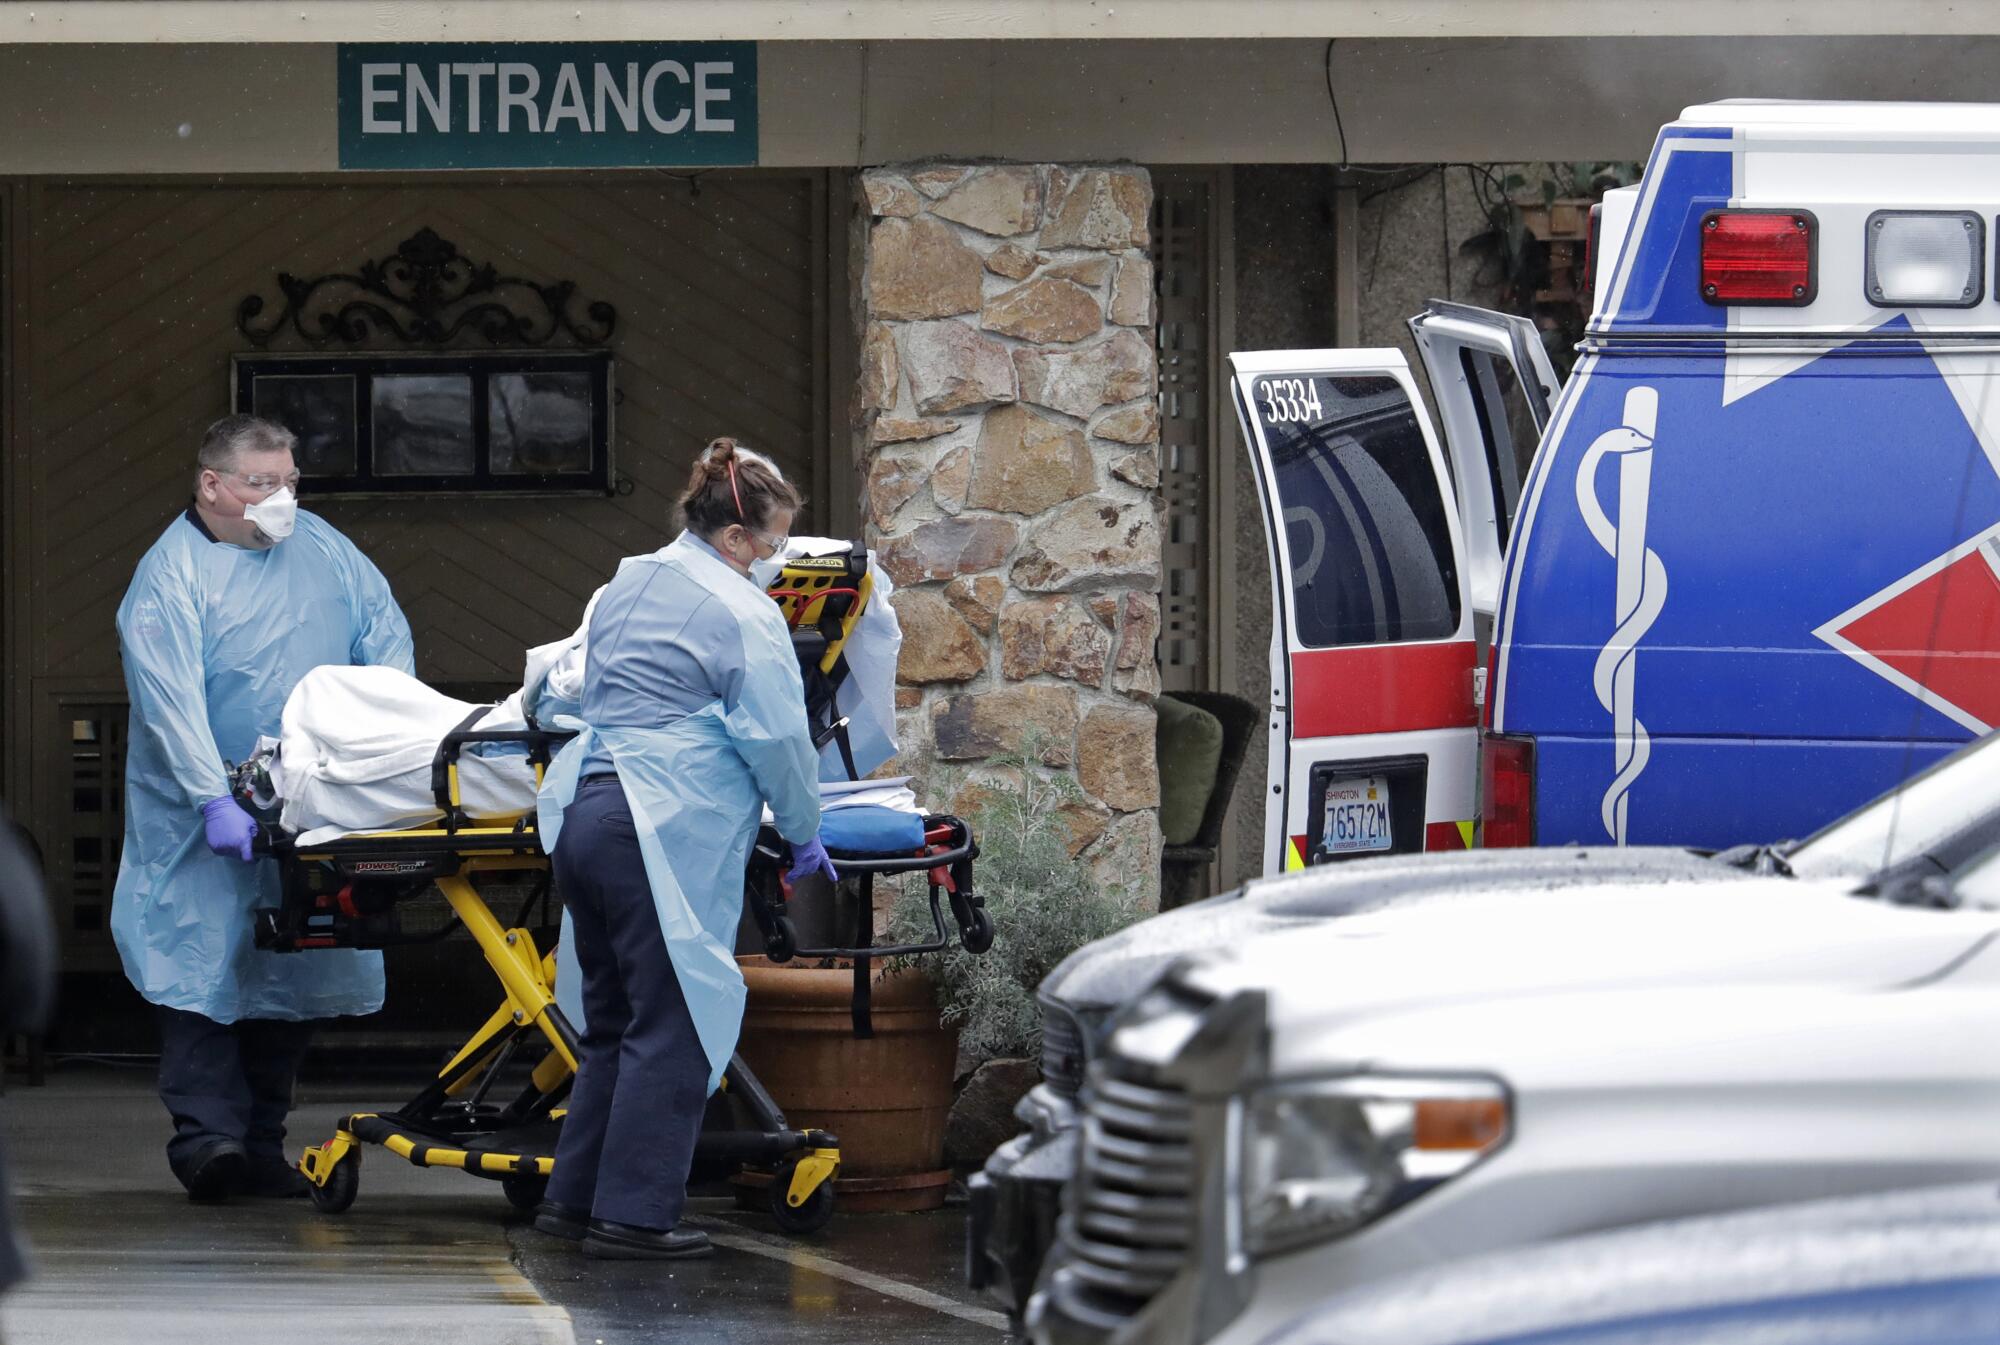 Ambulance workers move a man on a stretcher from the Life Care Center in Kirkland, Wash., into an ambulance.